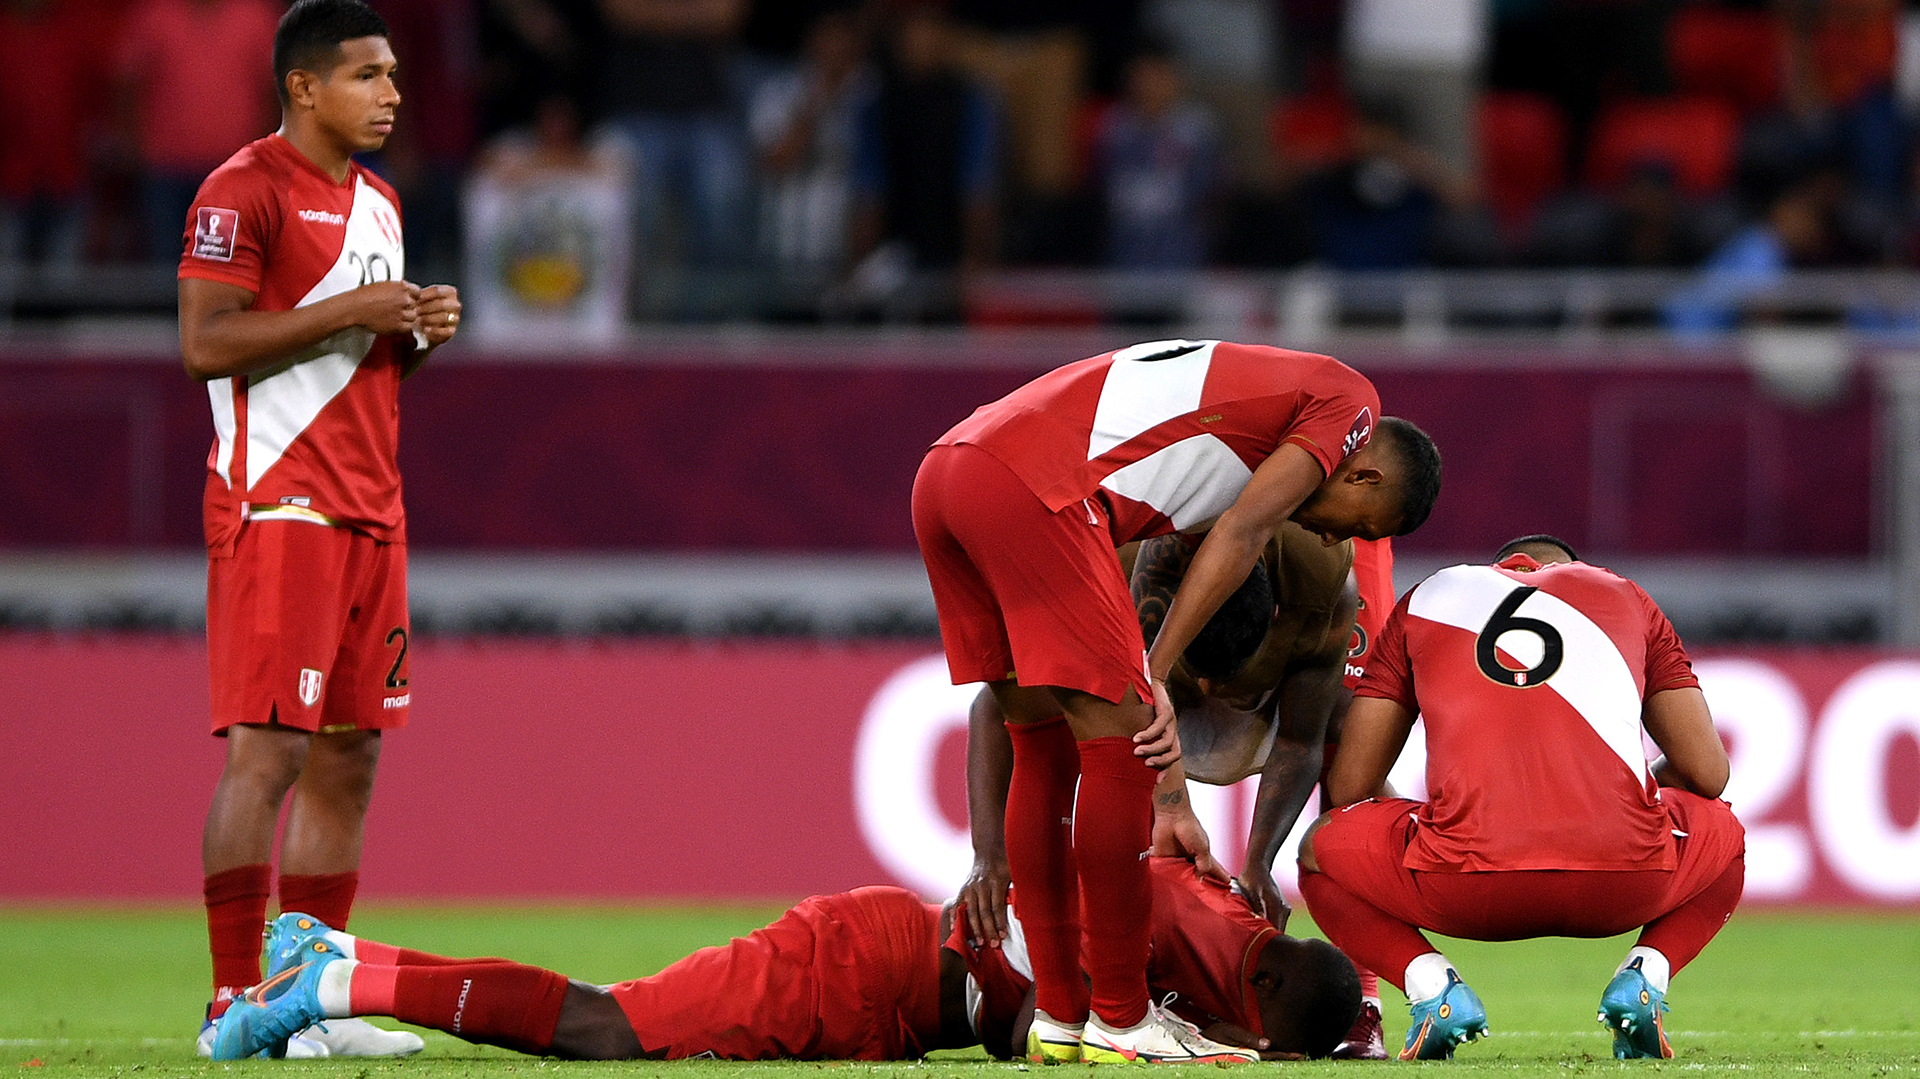 Dejected Peru players support each other after being defeated by Australia in the 2022 FIFA World Cup Playoff match between Australia Socceroos and Peru at Ahmad Bin Ali Stadium on June 13, 2022 in Doha, Qatar.